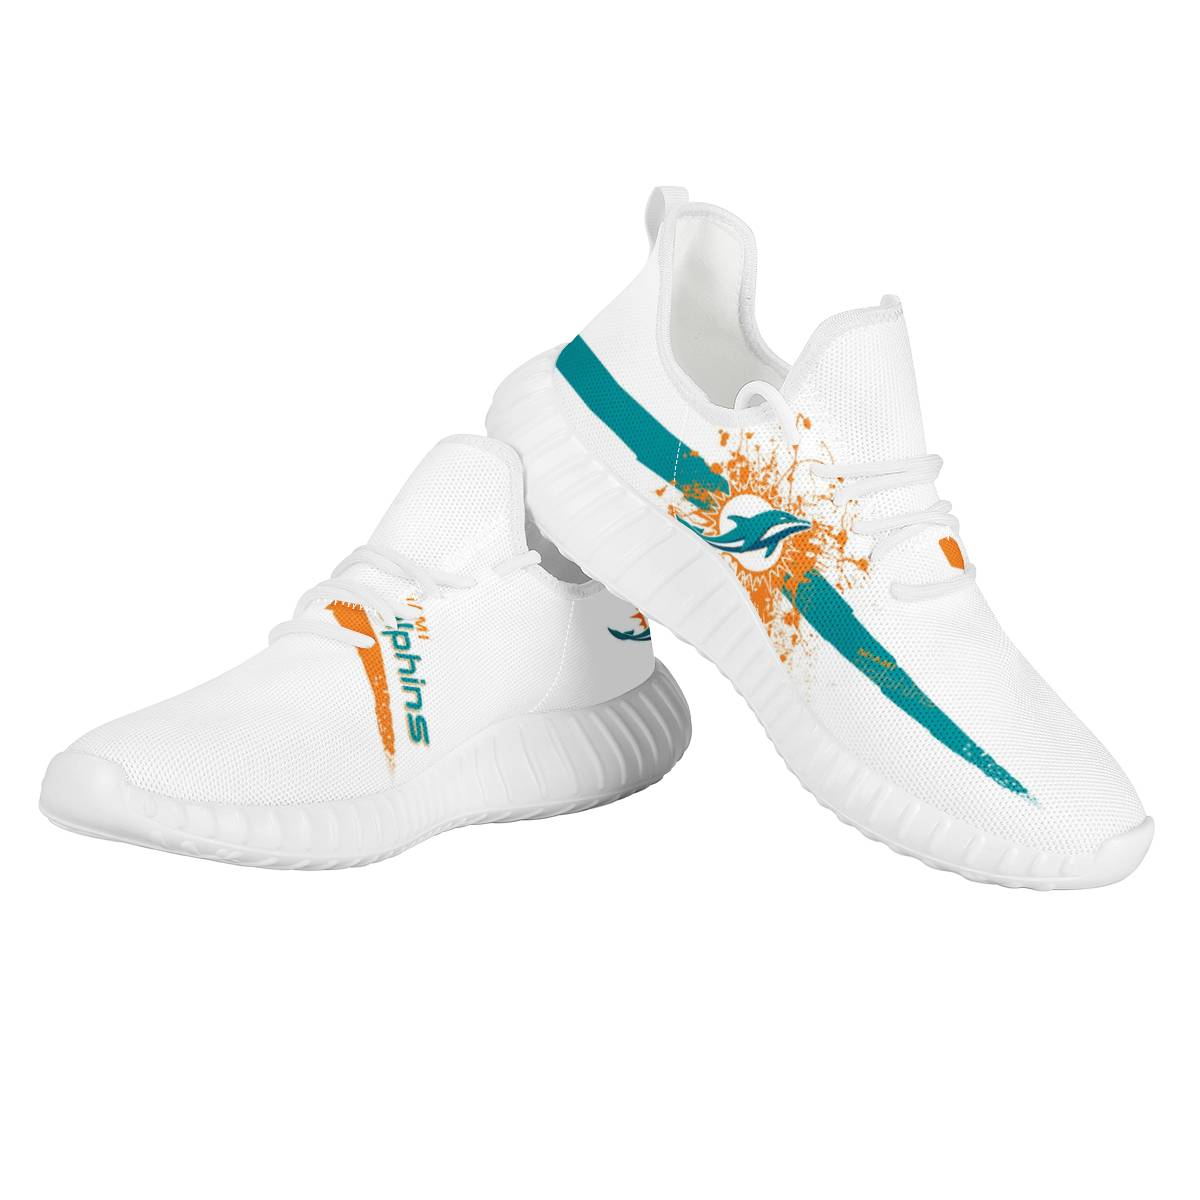 Women's Miami Dolphins Mesh Knit Sneakers/Shoes 002